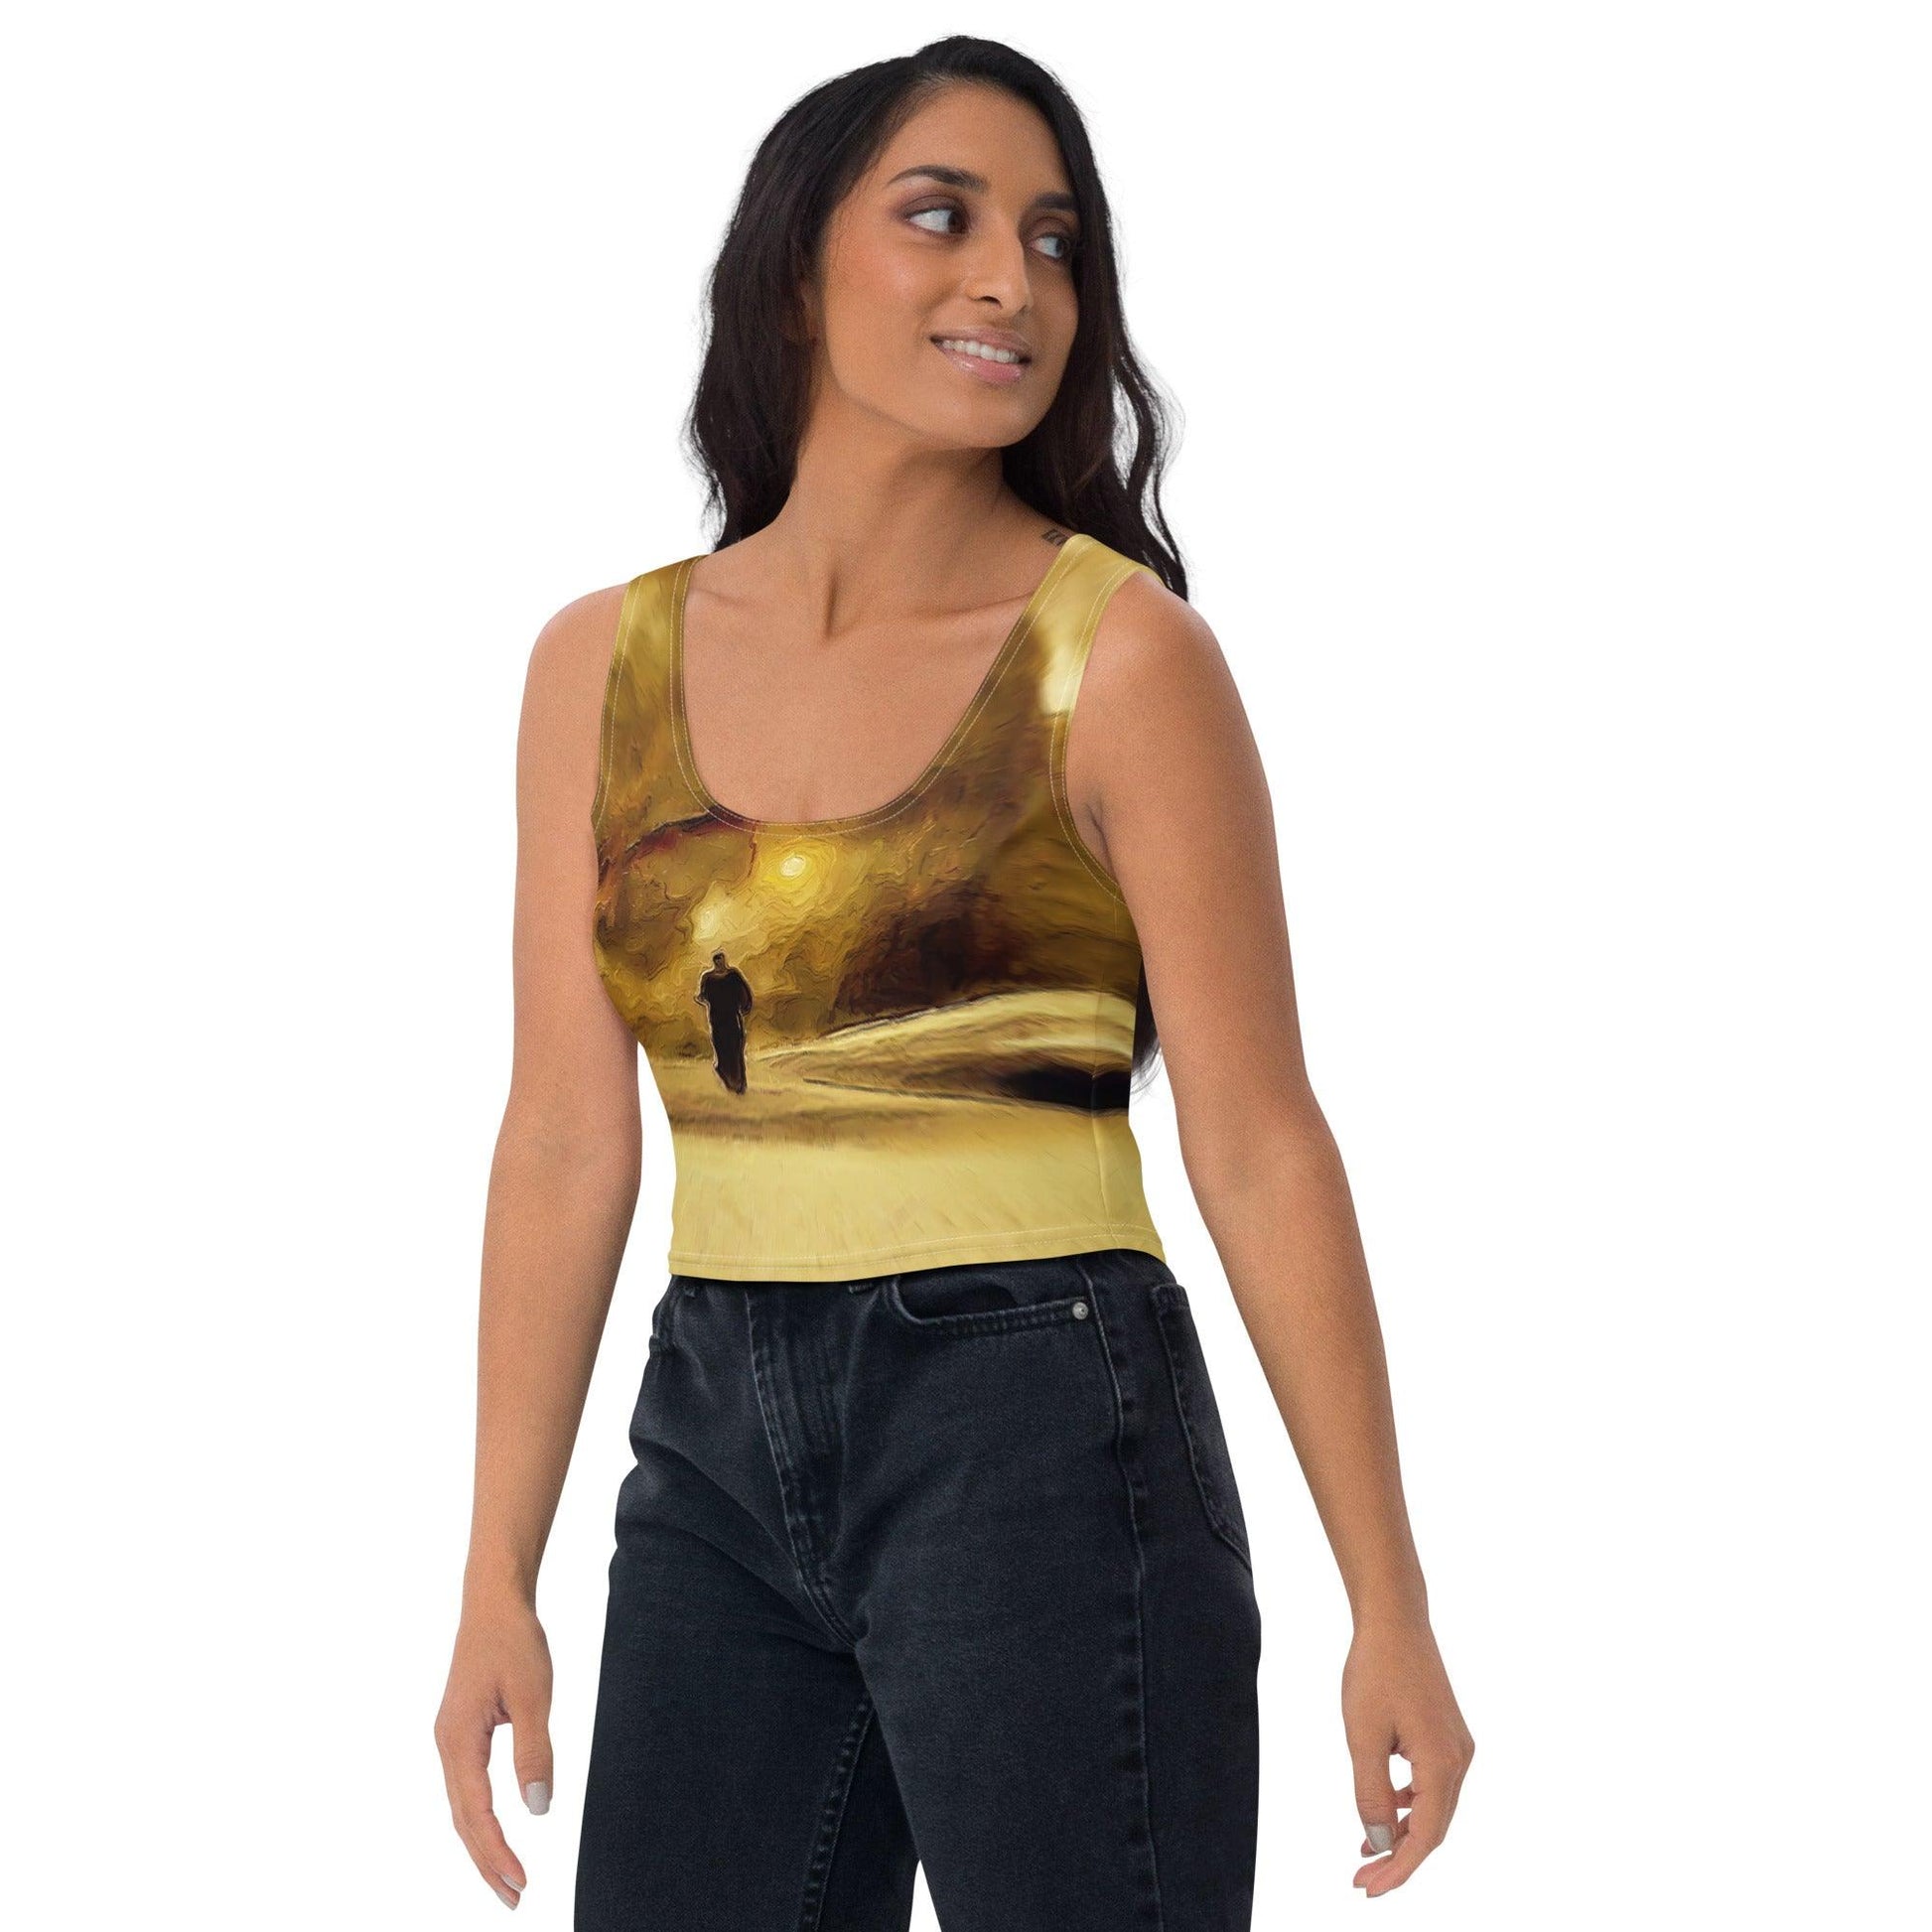 Eye Of The Sand Storm - Womens Crop Top - iSAW Company